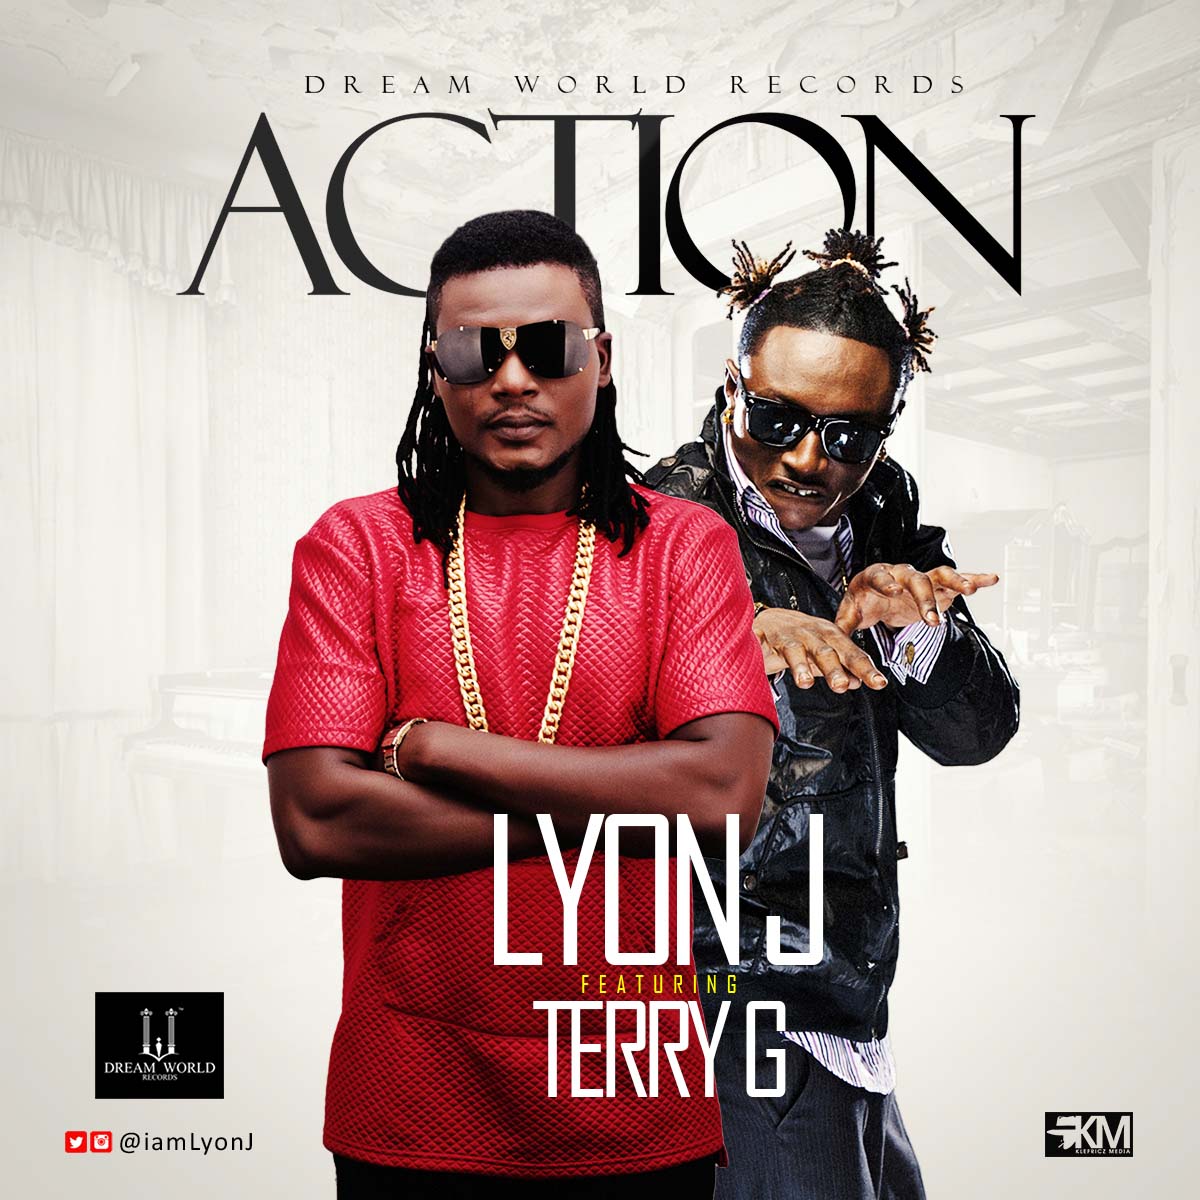 Lyon J ft Terry G - Action